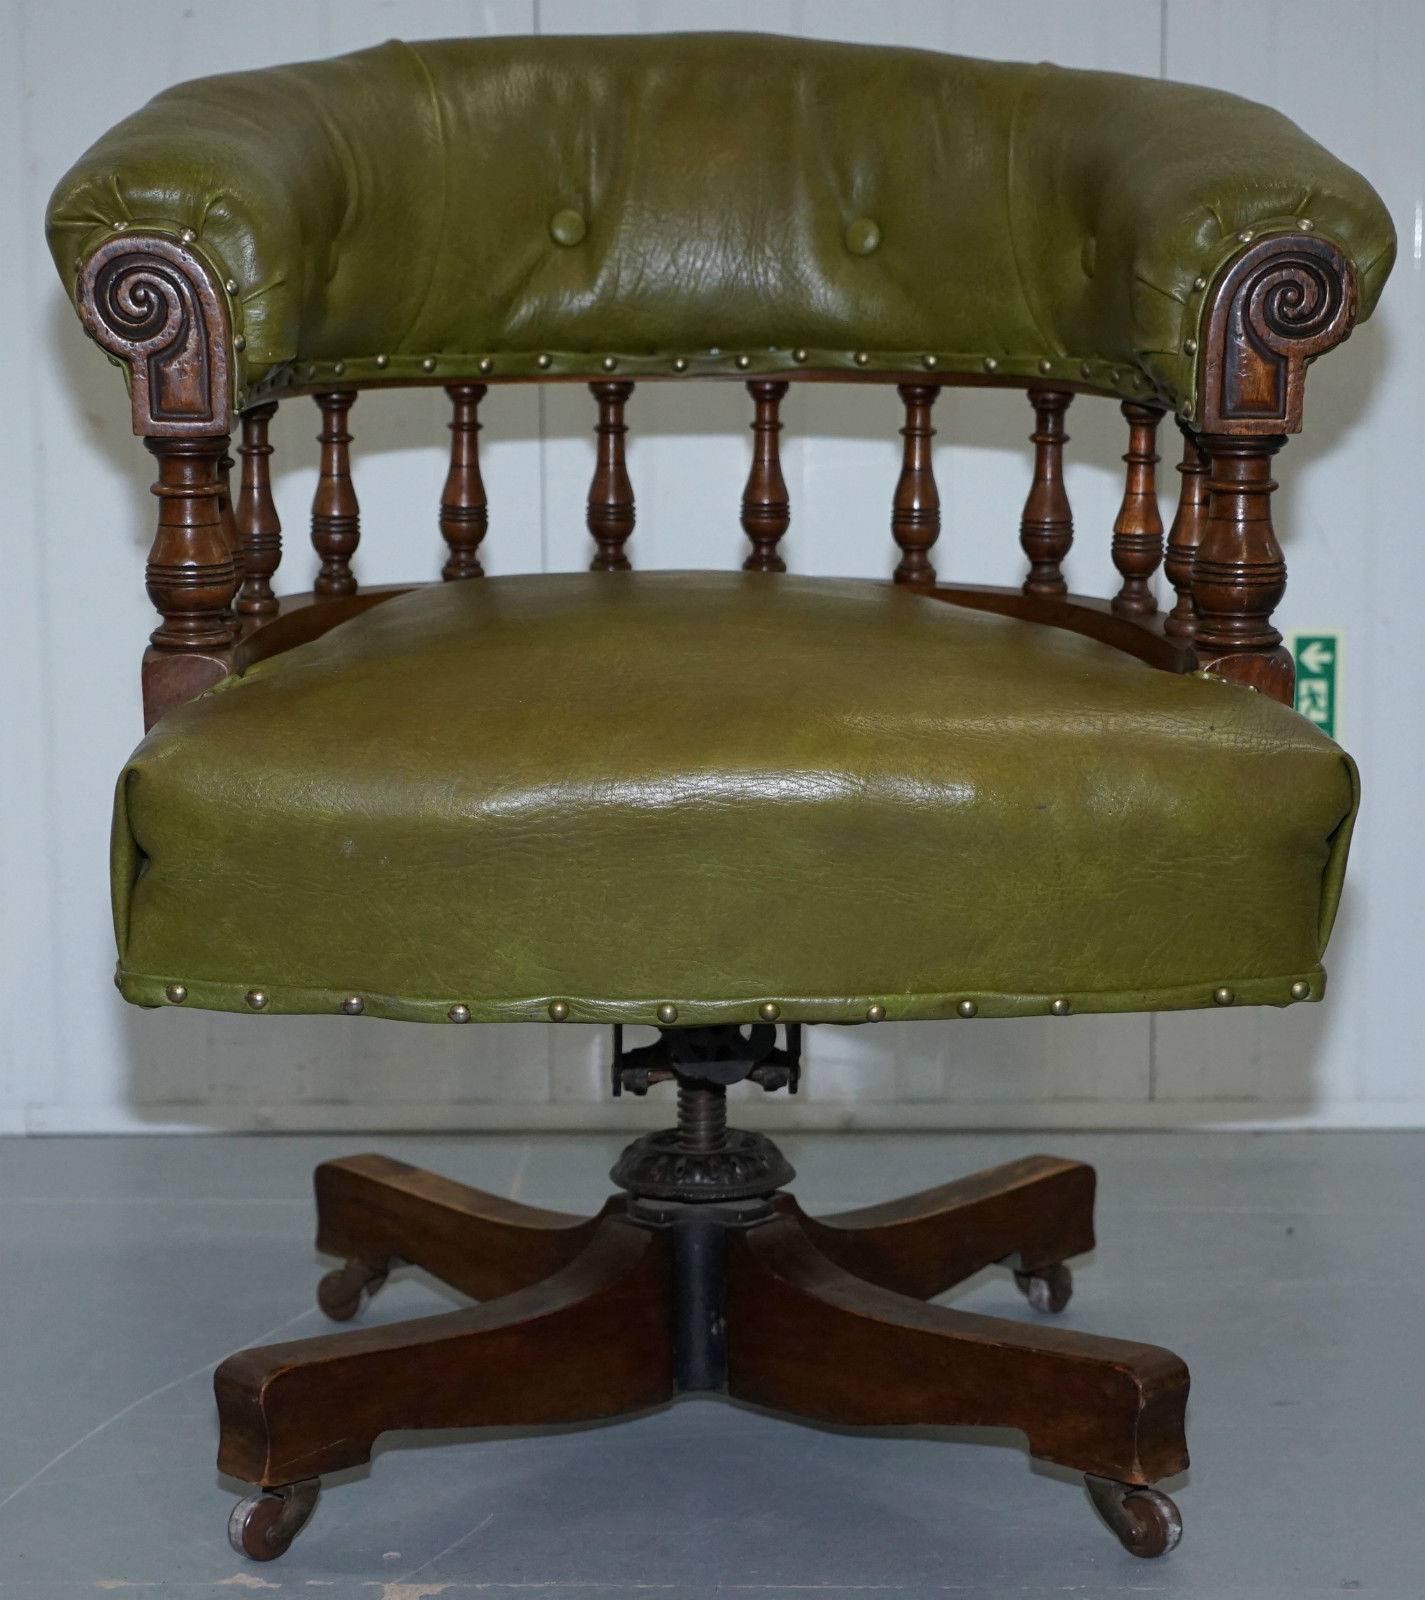 We are delighted to offer for sale this exceptionally rare and original Victorian, circa 1860 Chesterfield buttoned captains office chair

This is the chair that all modern pieces are based on, it has a solid mahogany frame, the leather upholstery